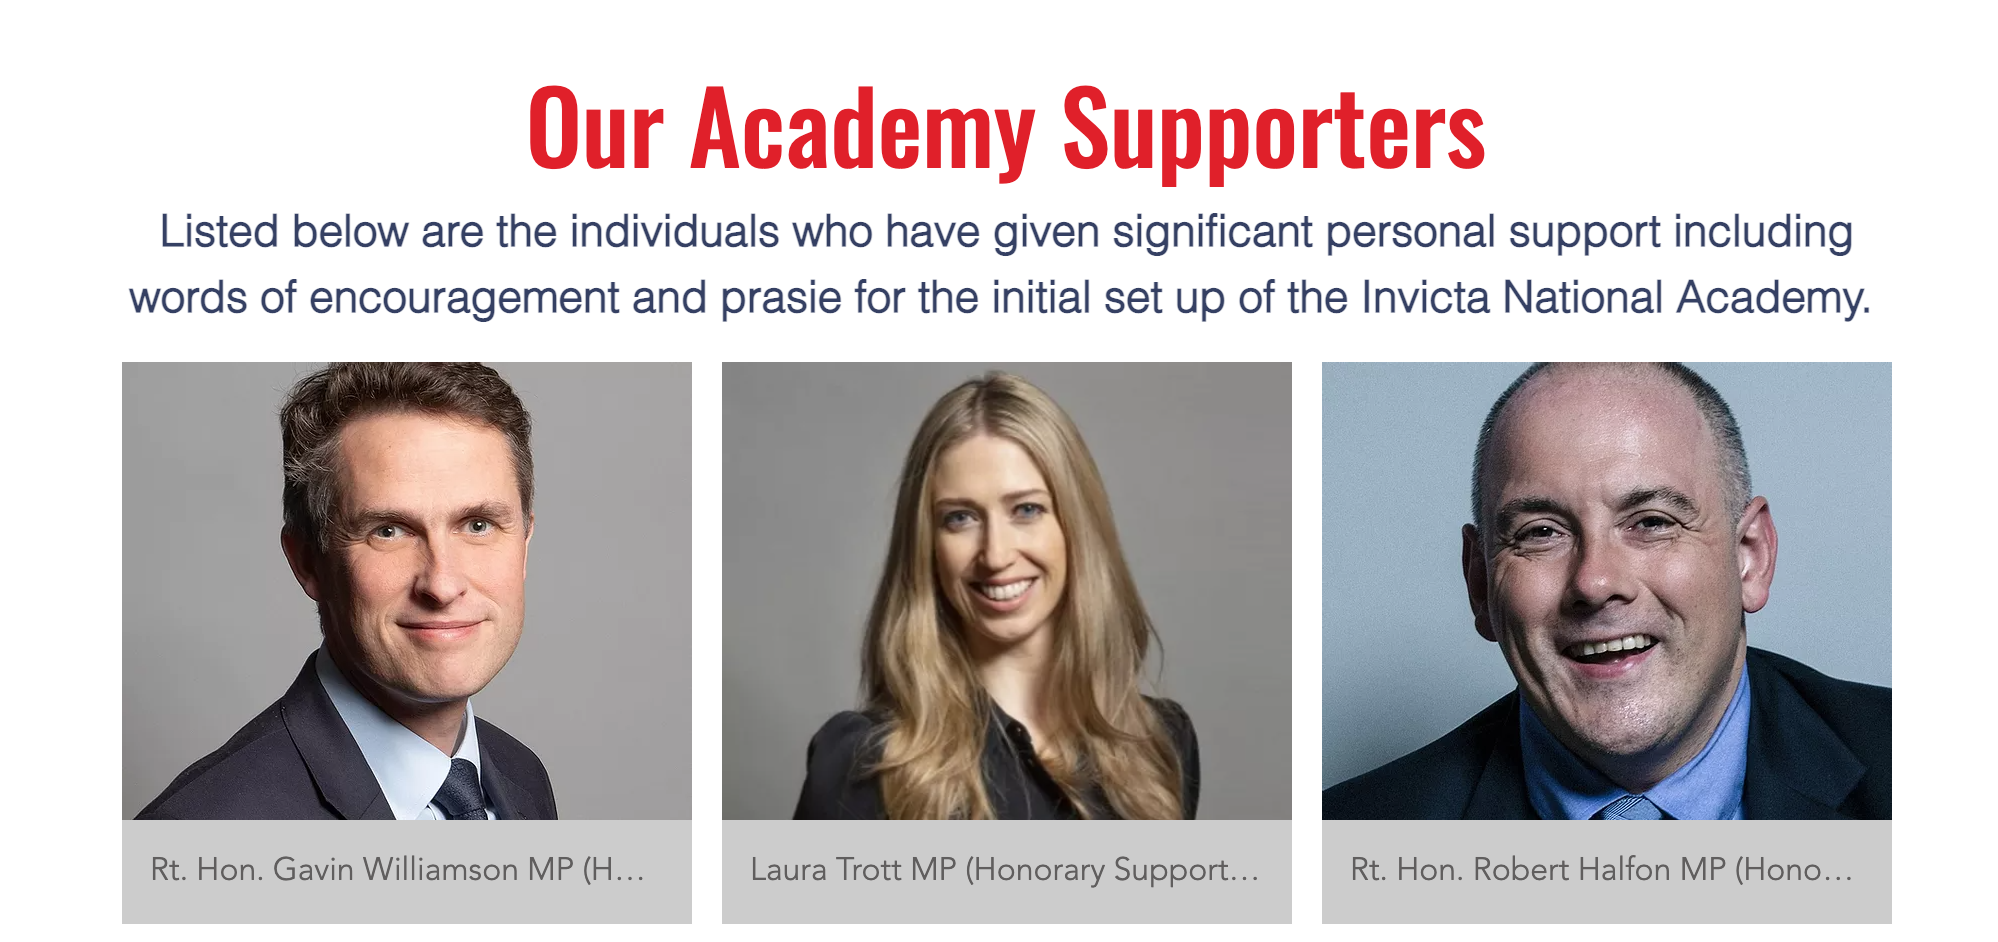 The modified Invicta National Academy website now lists Gavin Williamson as a supporter rather than a sponsor.